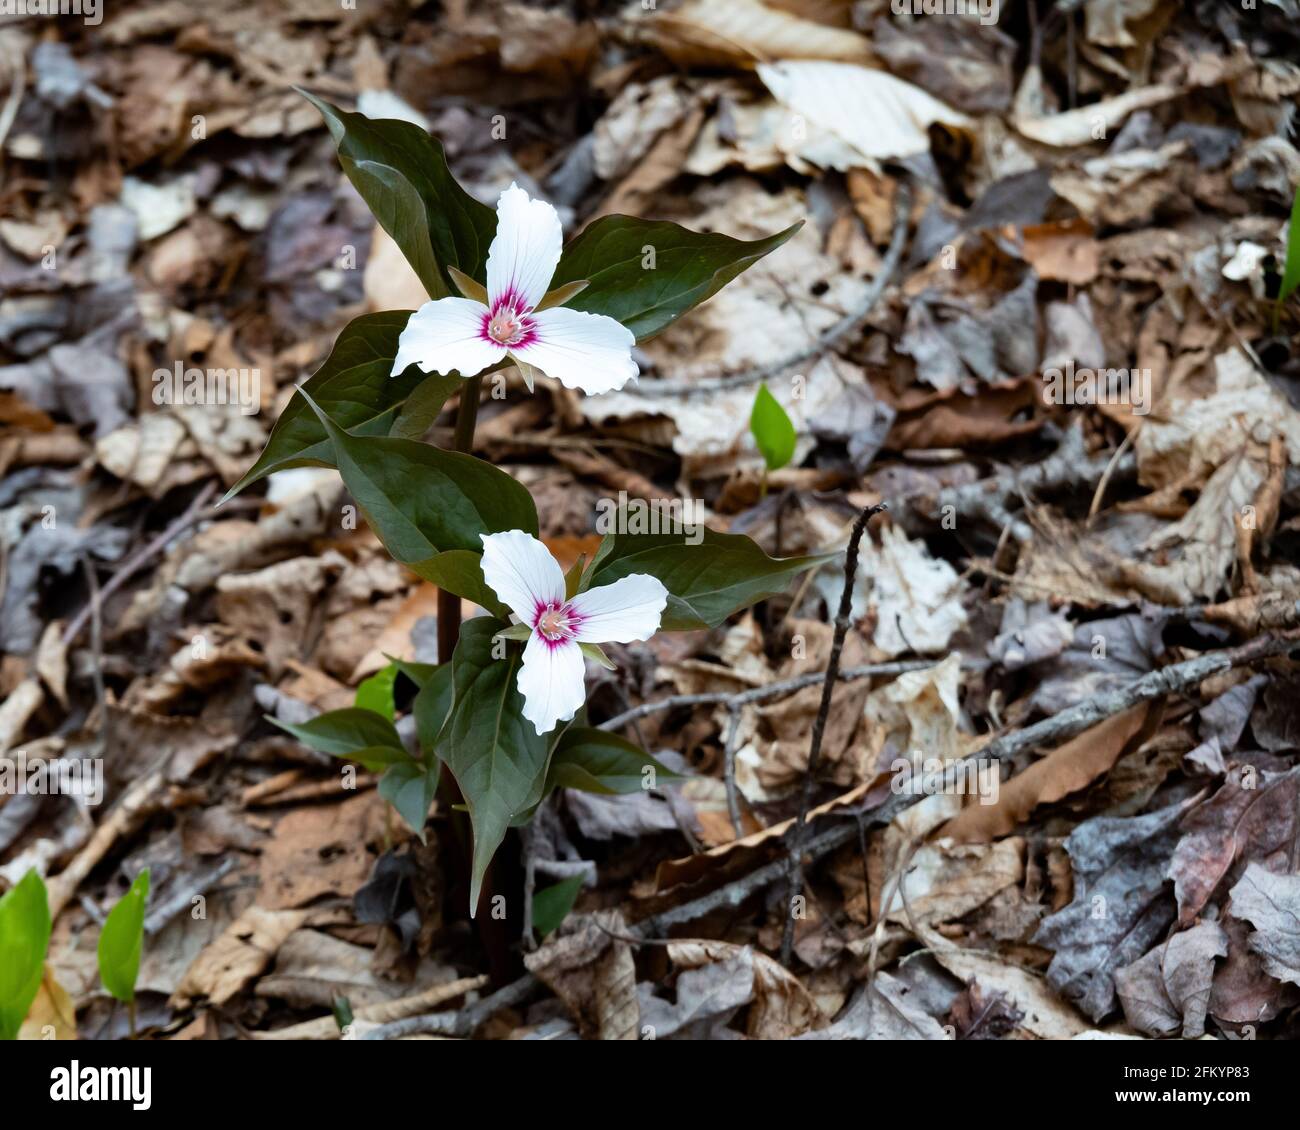 Two painted trillium plants with flowers,Trillium undulatum, growing in the Adirondack Mountains wilderness in early spring. Stock Photo